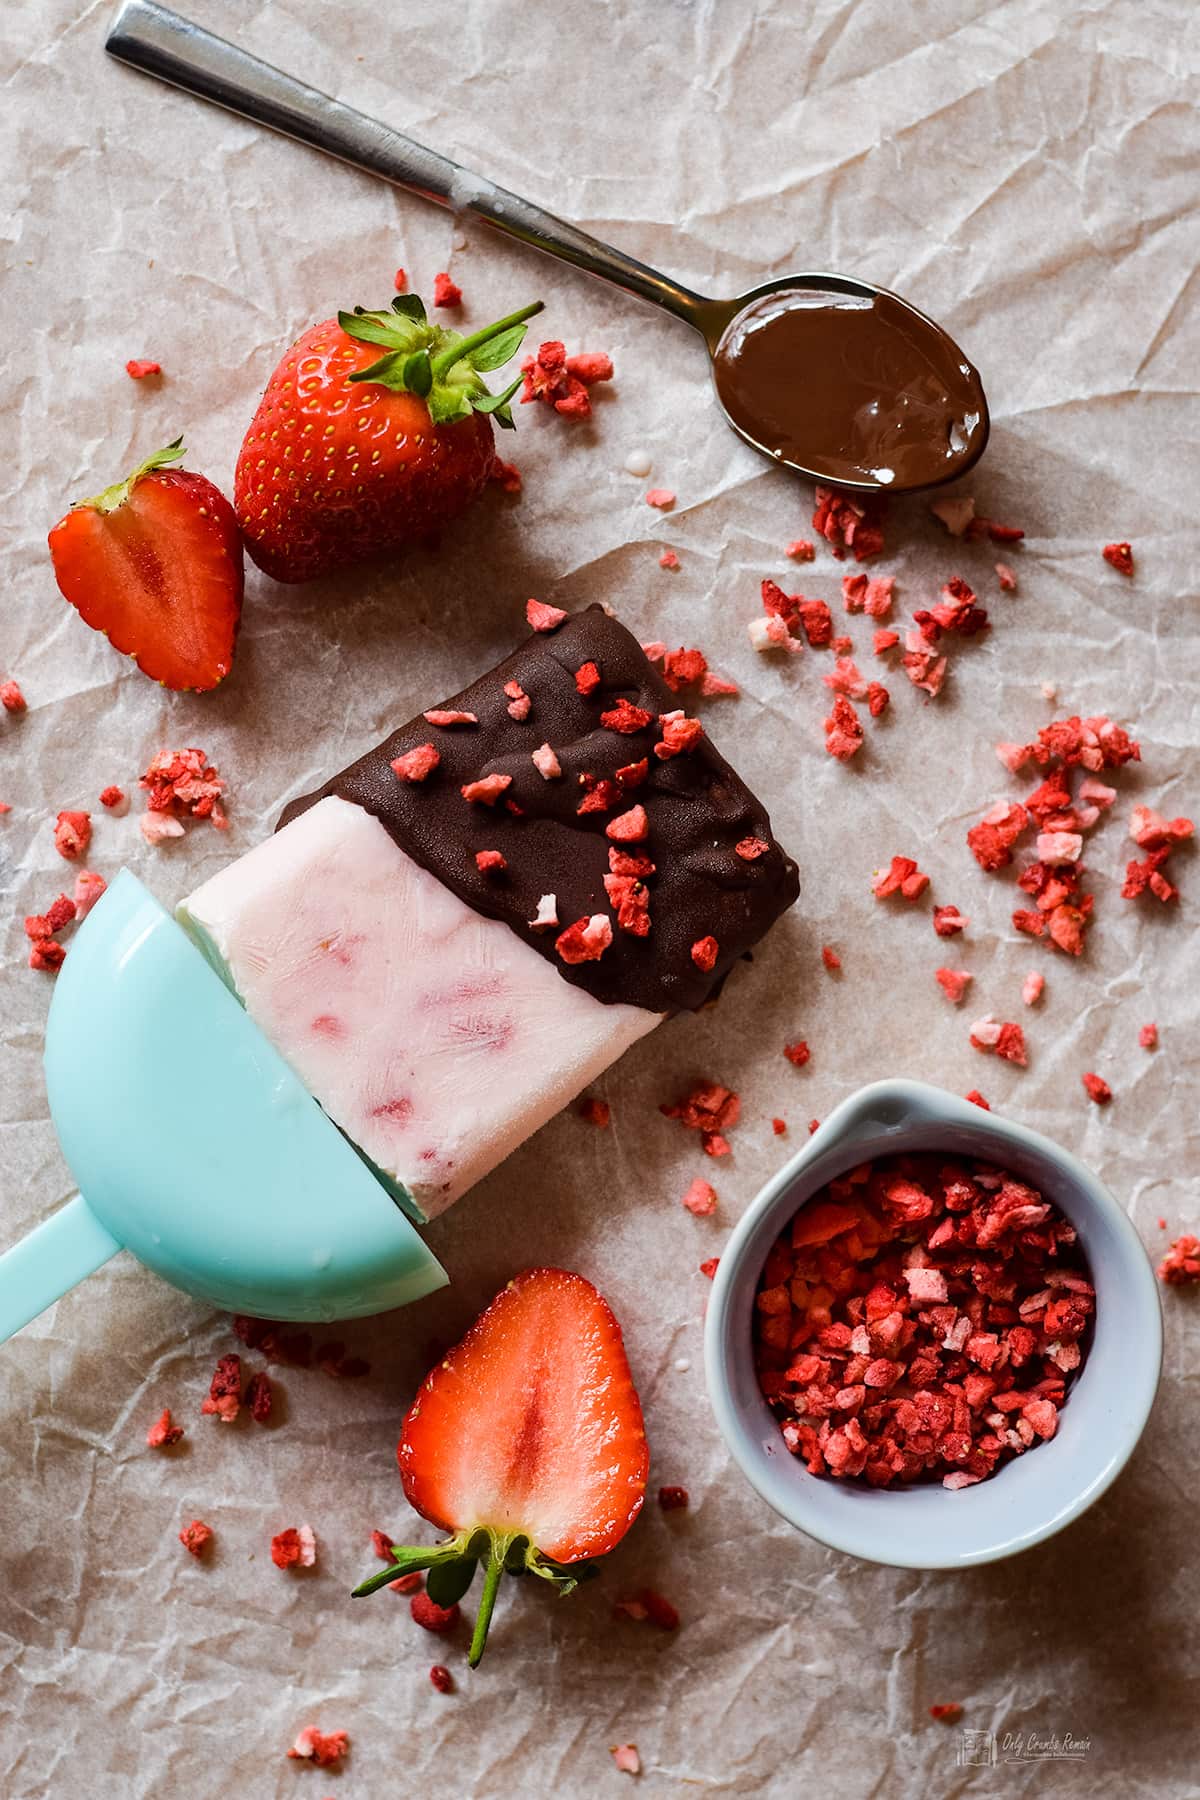 strawberry greek yogurt lolly coated in chcolate with strawberries and freeze dried strawberries around it